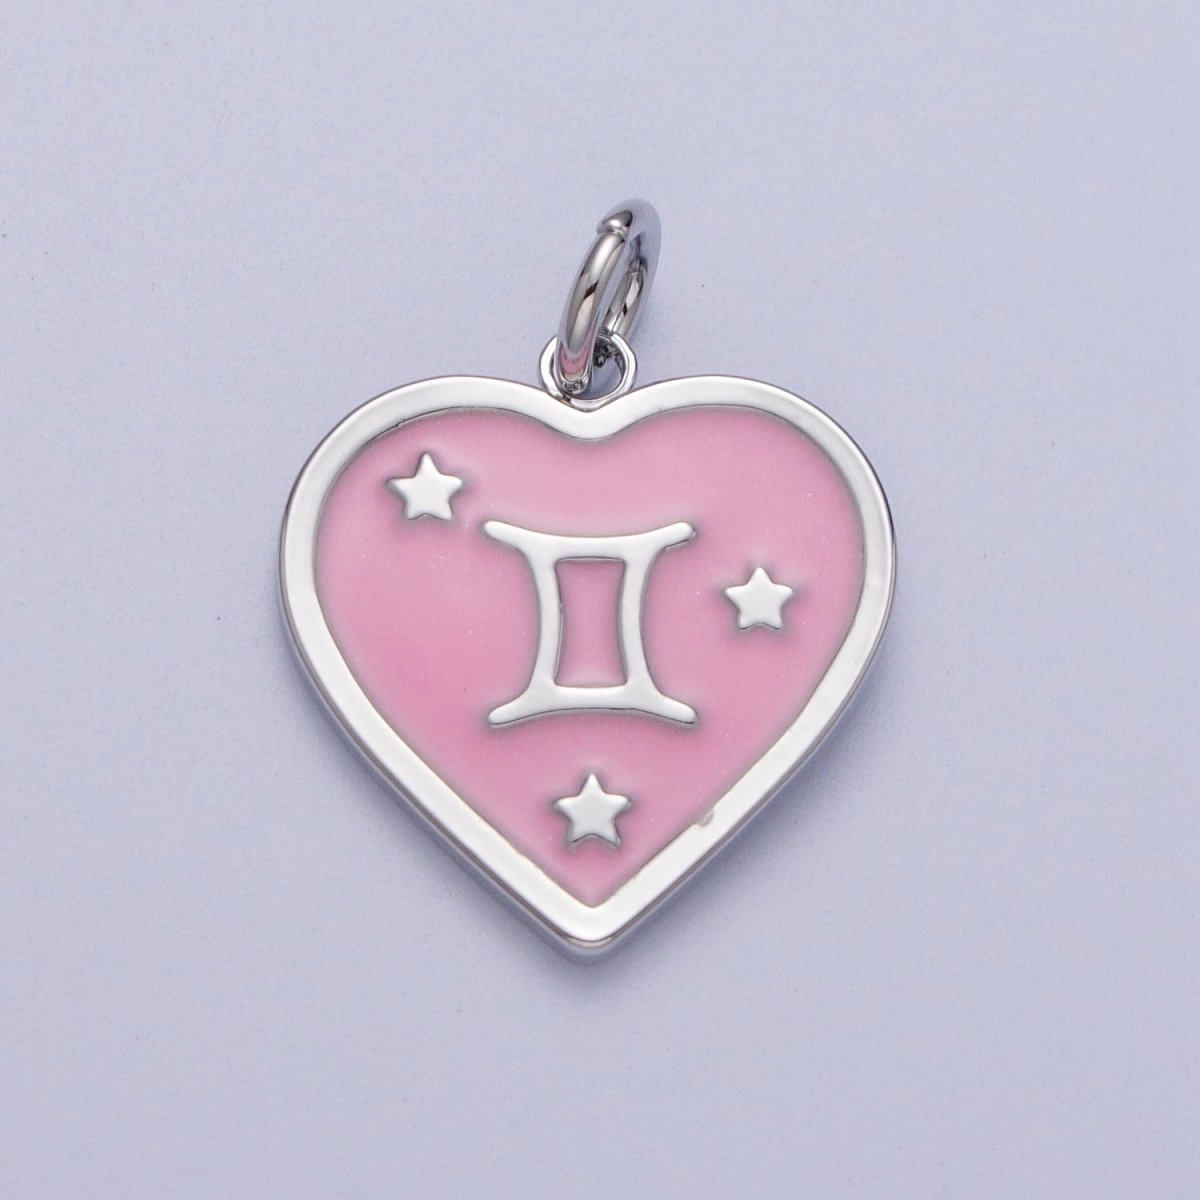 White Gold Filled Heart Pink Enamel Zodiac Constellation Astrology Birth Star Sign Silver Charm | A-199 to A-210 - DLUXCA